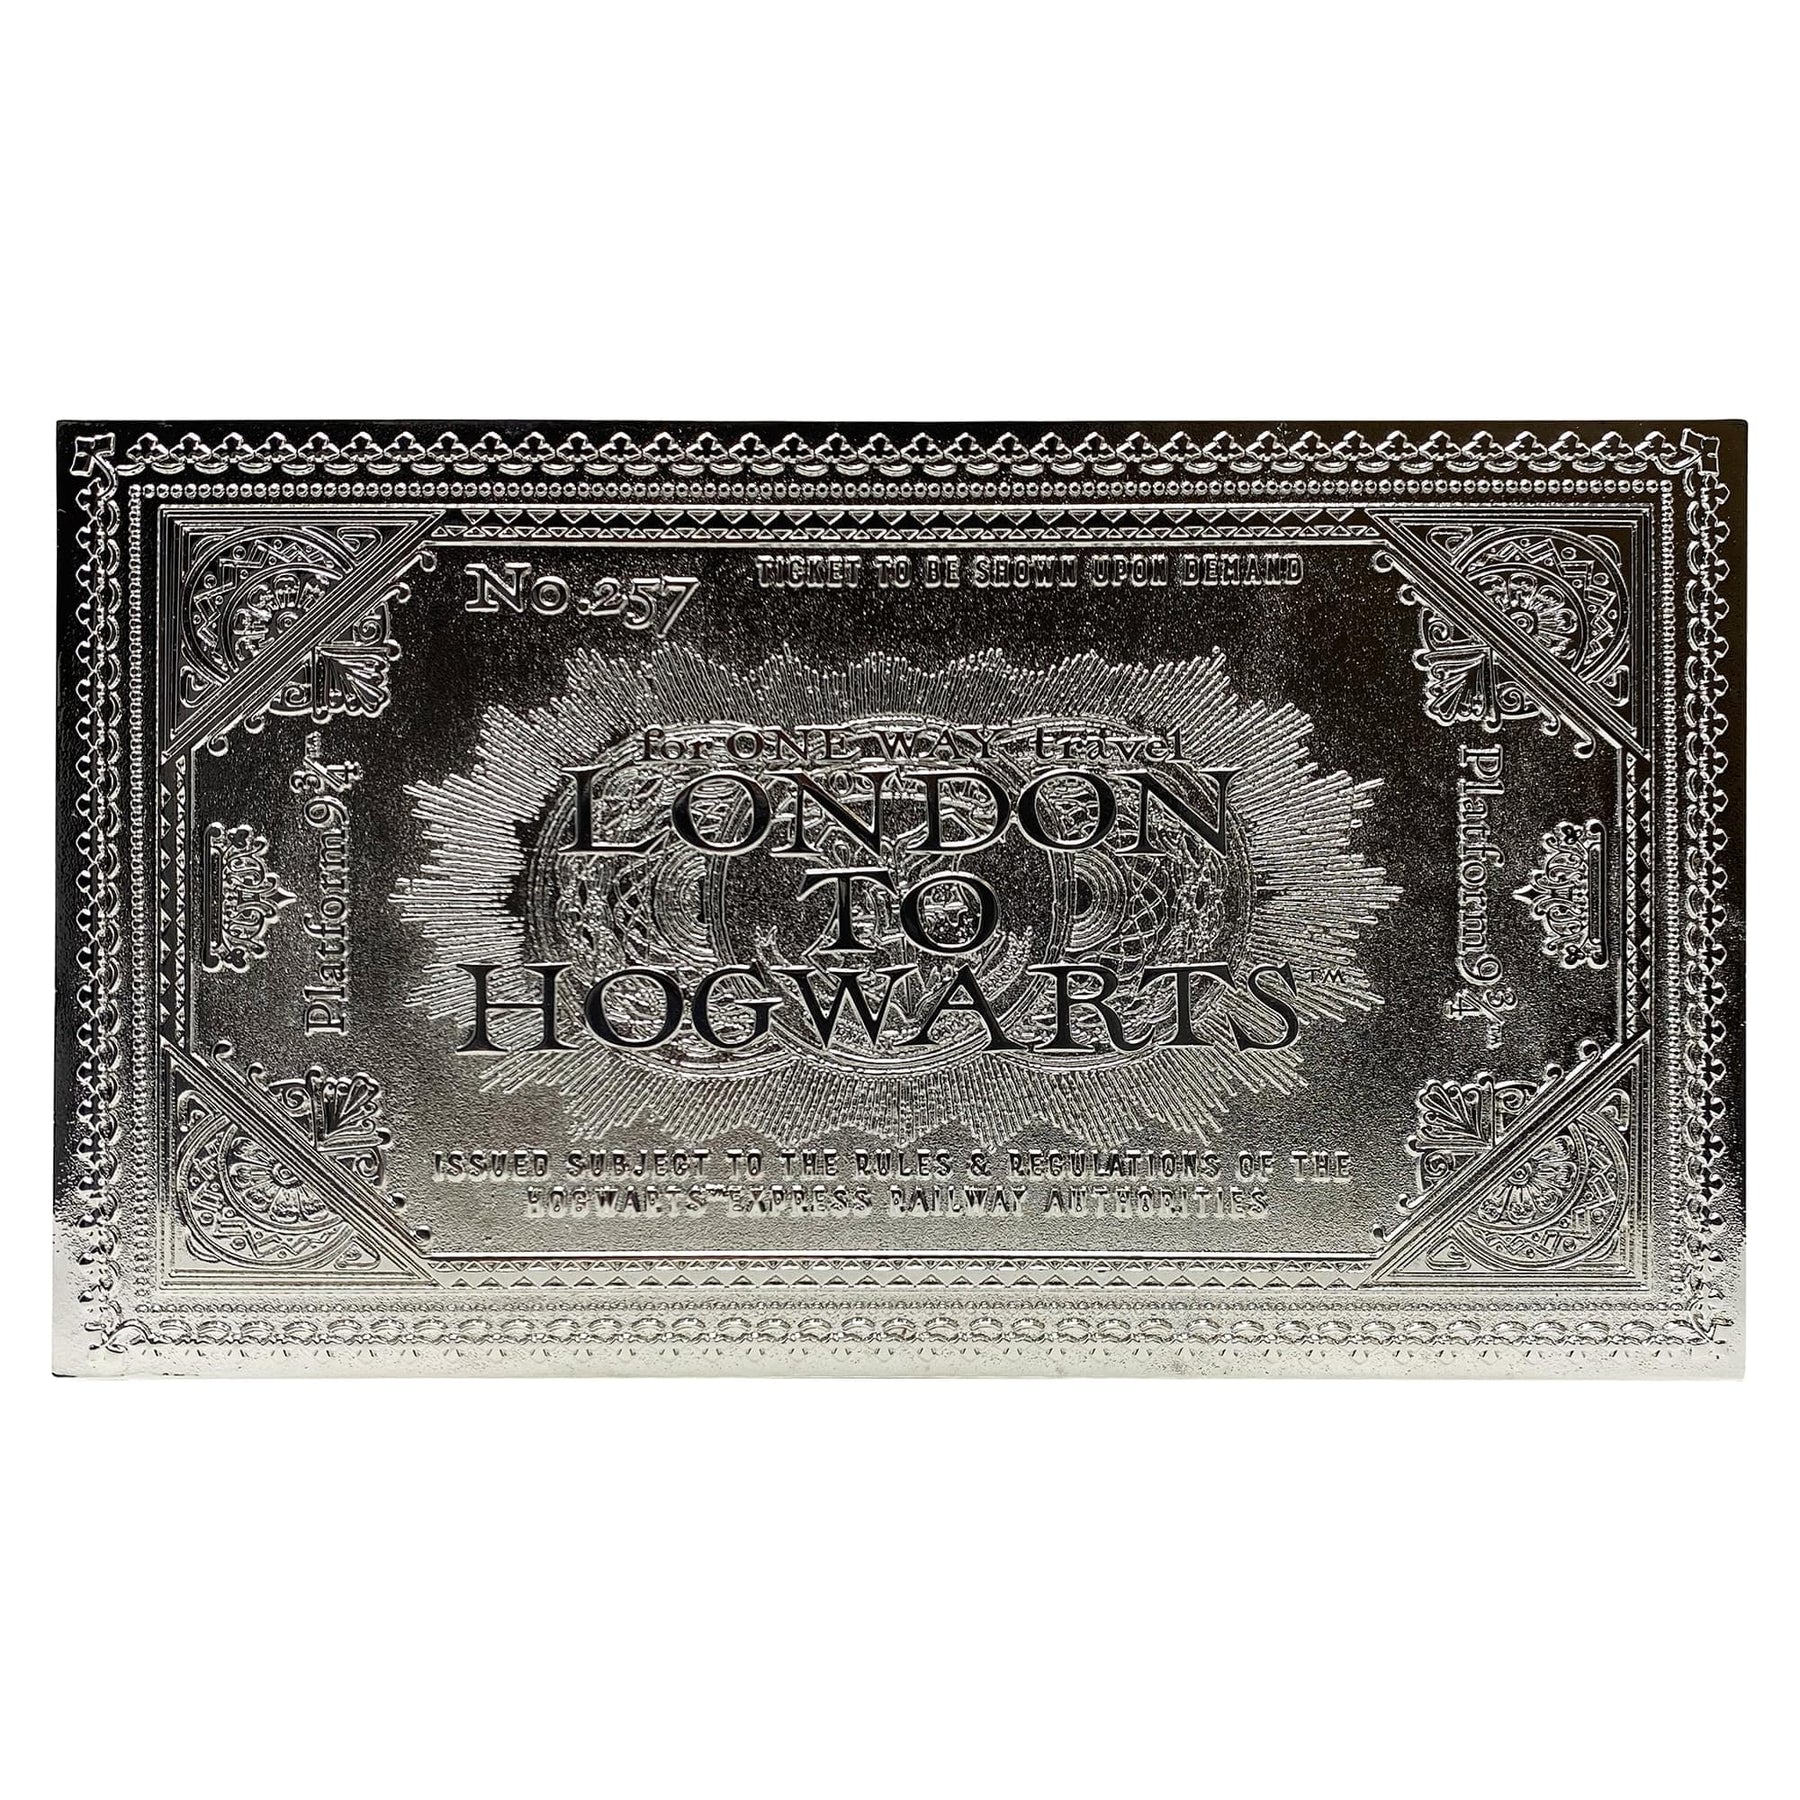 Harry Potter Limited Edition Metal Replica | Hogwarts Train Ticket